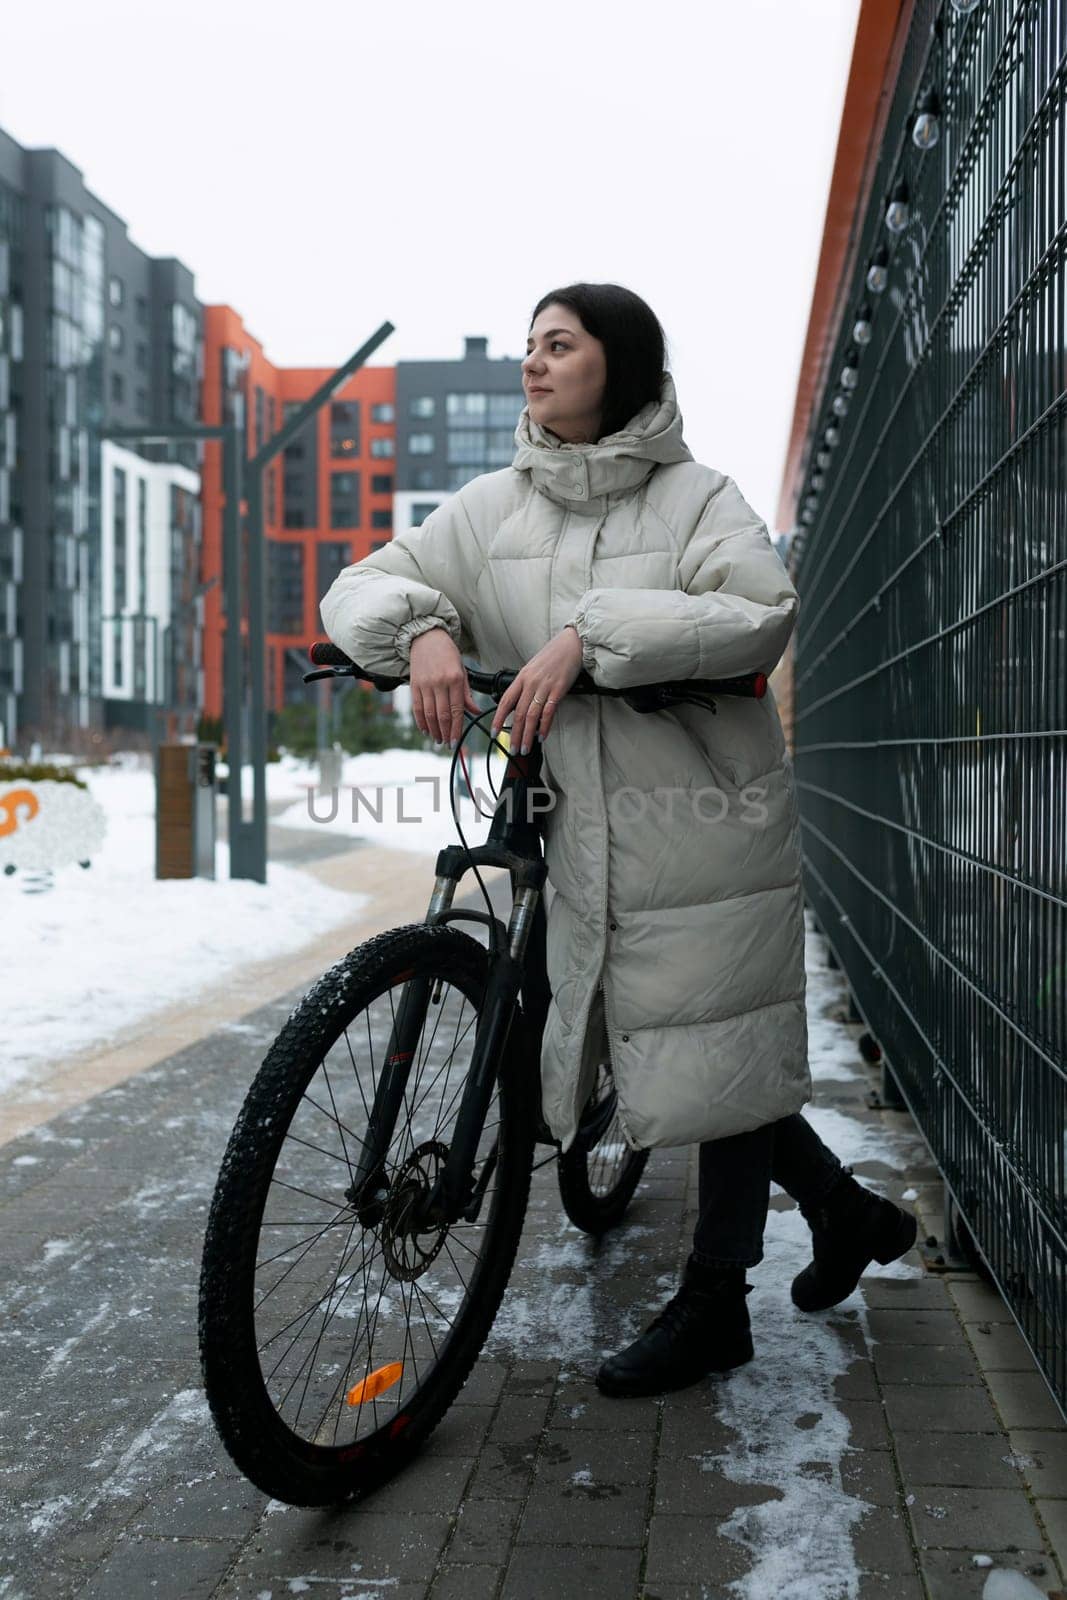 A woman is standing next to a bike in a snowy landscape. She is wearing winter clothing and appears to be preparing to ride the bike through the snow-covered terrain.